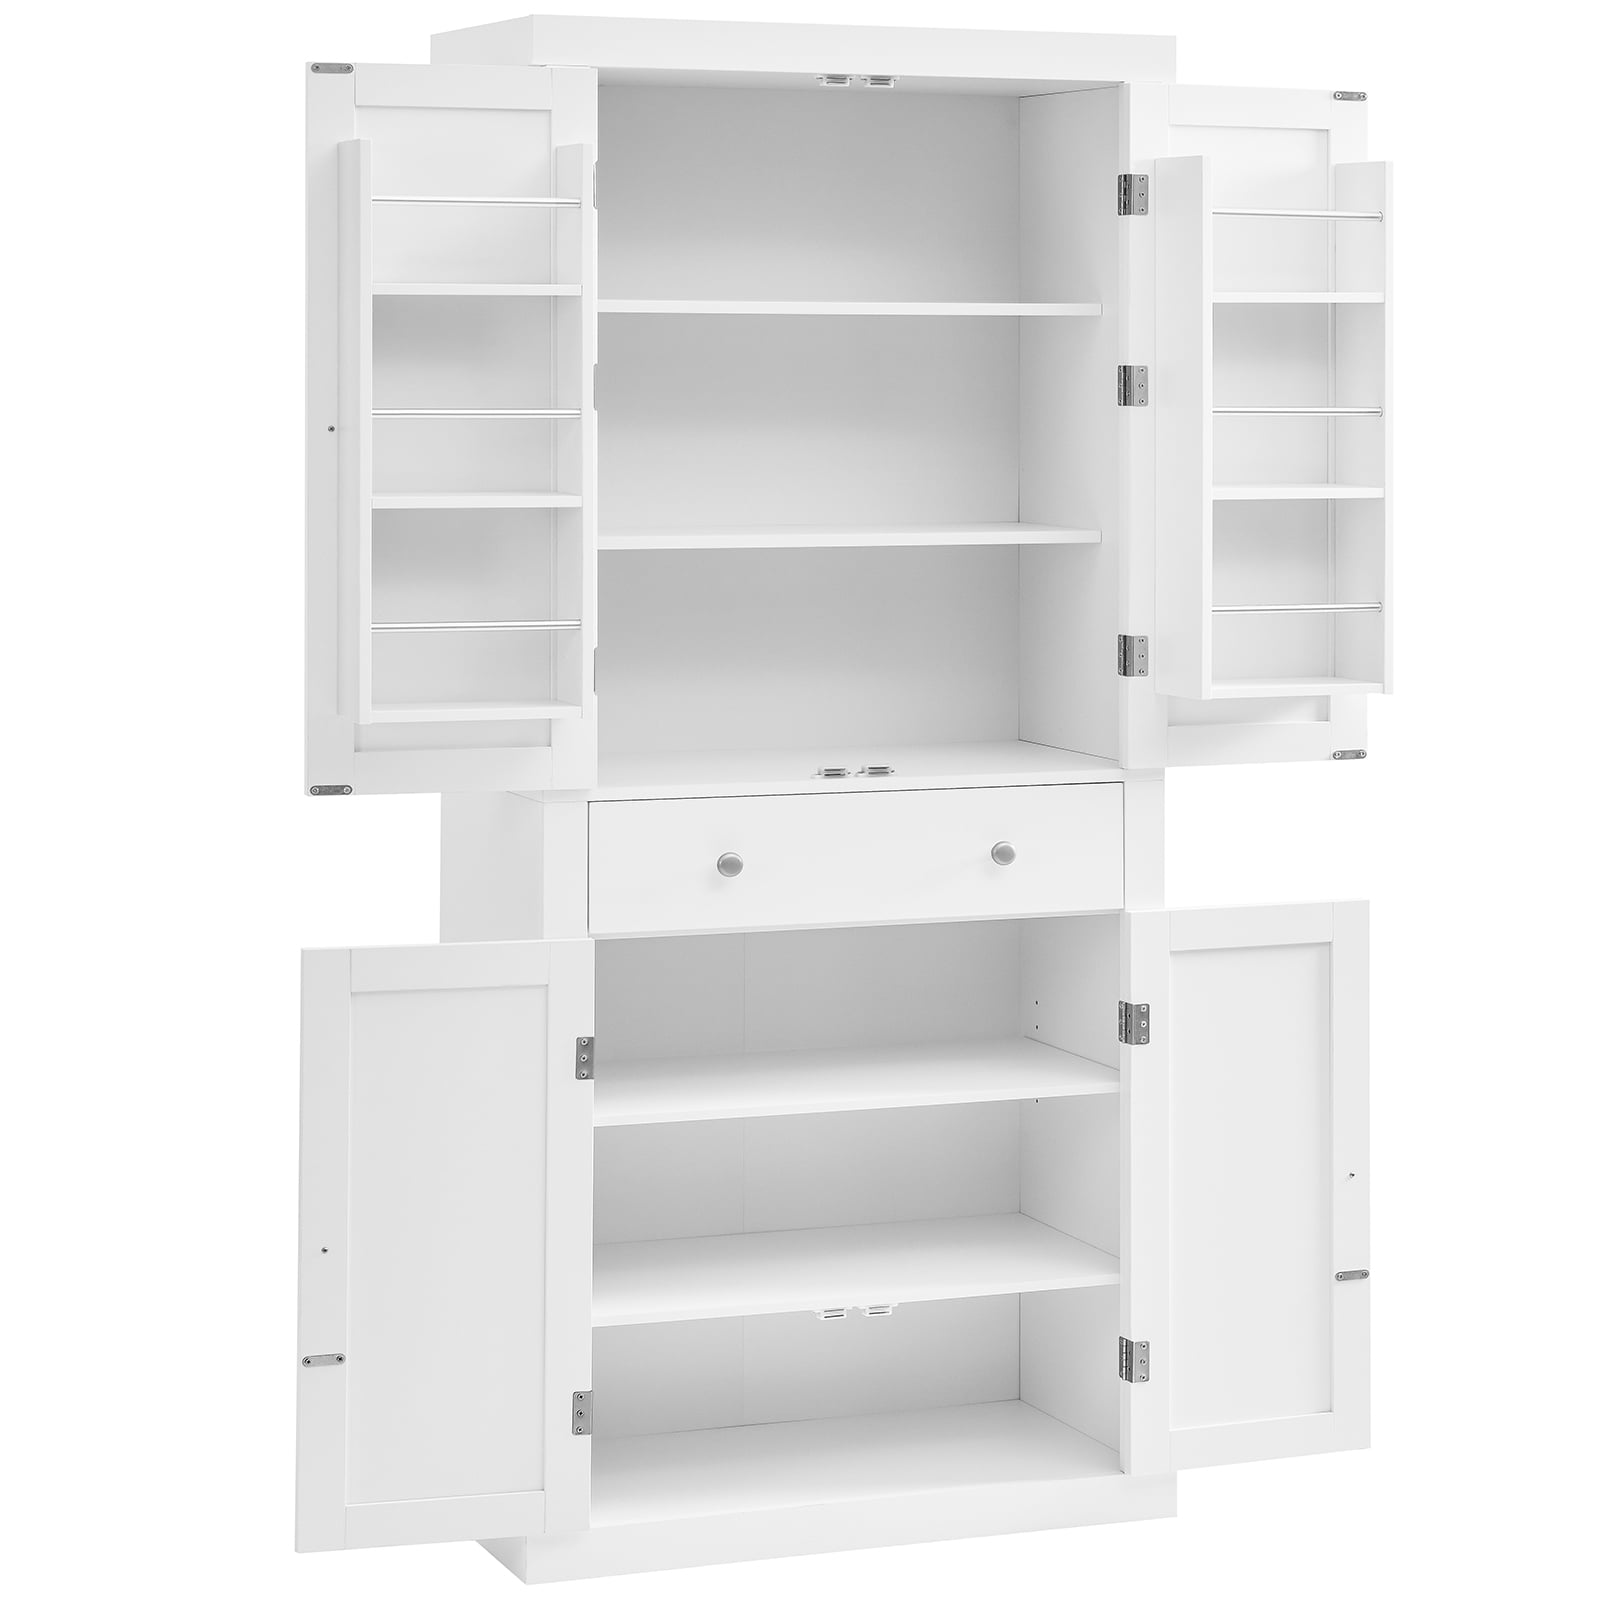 ETASE 72 Pantry Cabinets, White Tall Kitchen Pantry Storage Cabinet with  Drawer & Adjustable Shelves, Buffet Cupboards Storage Cabinet for Bedroom